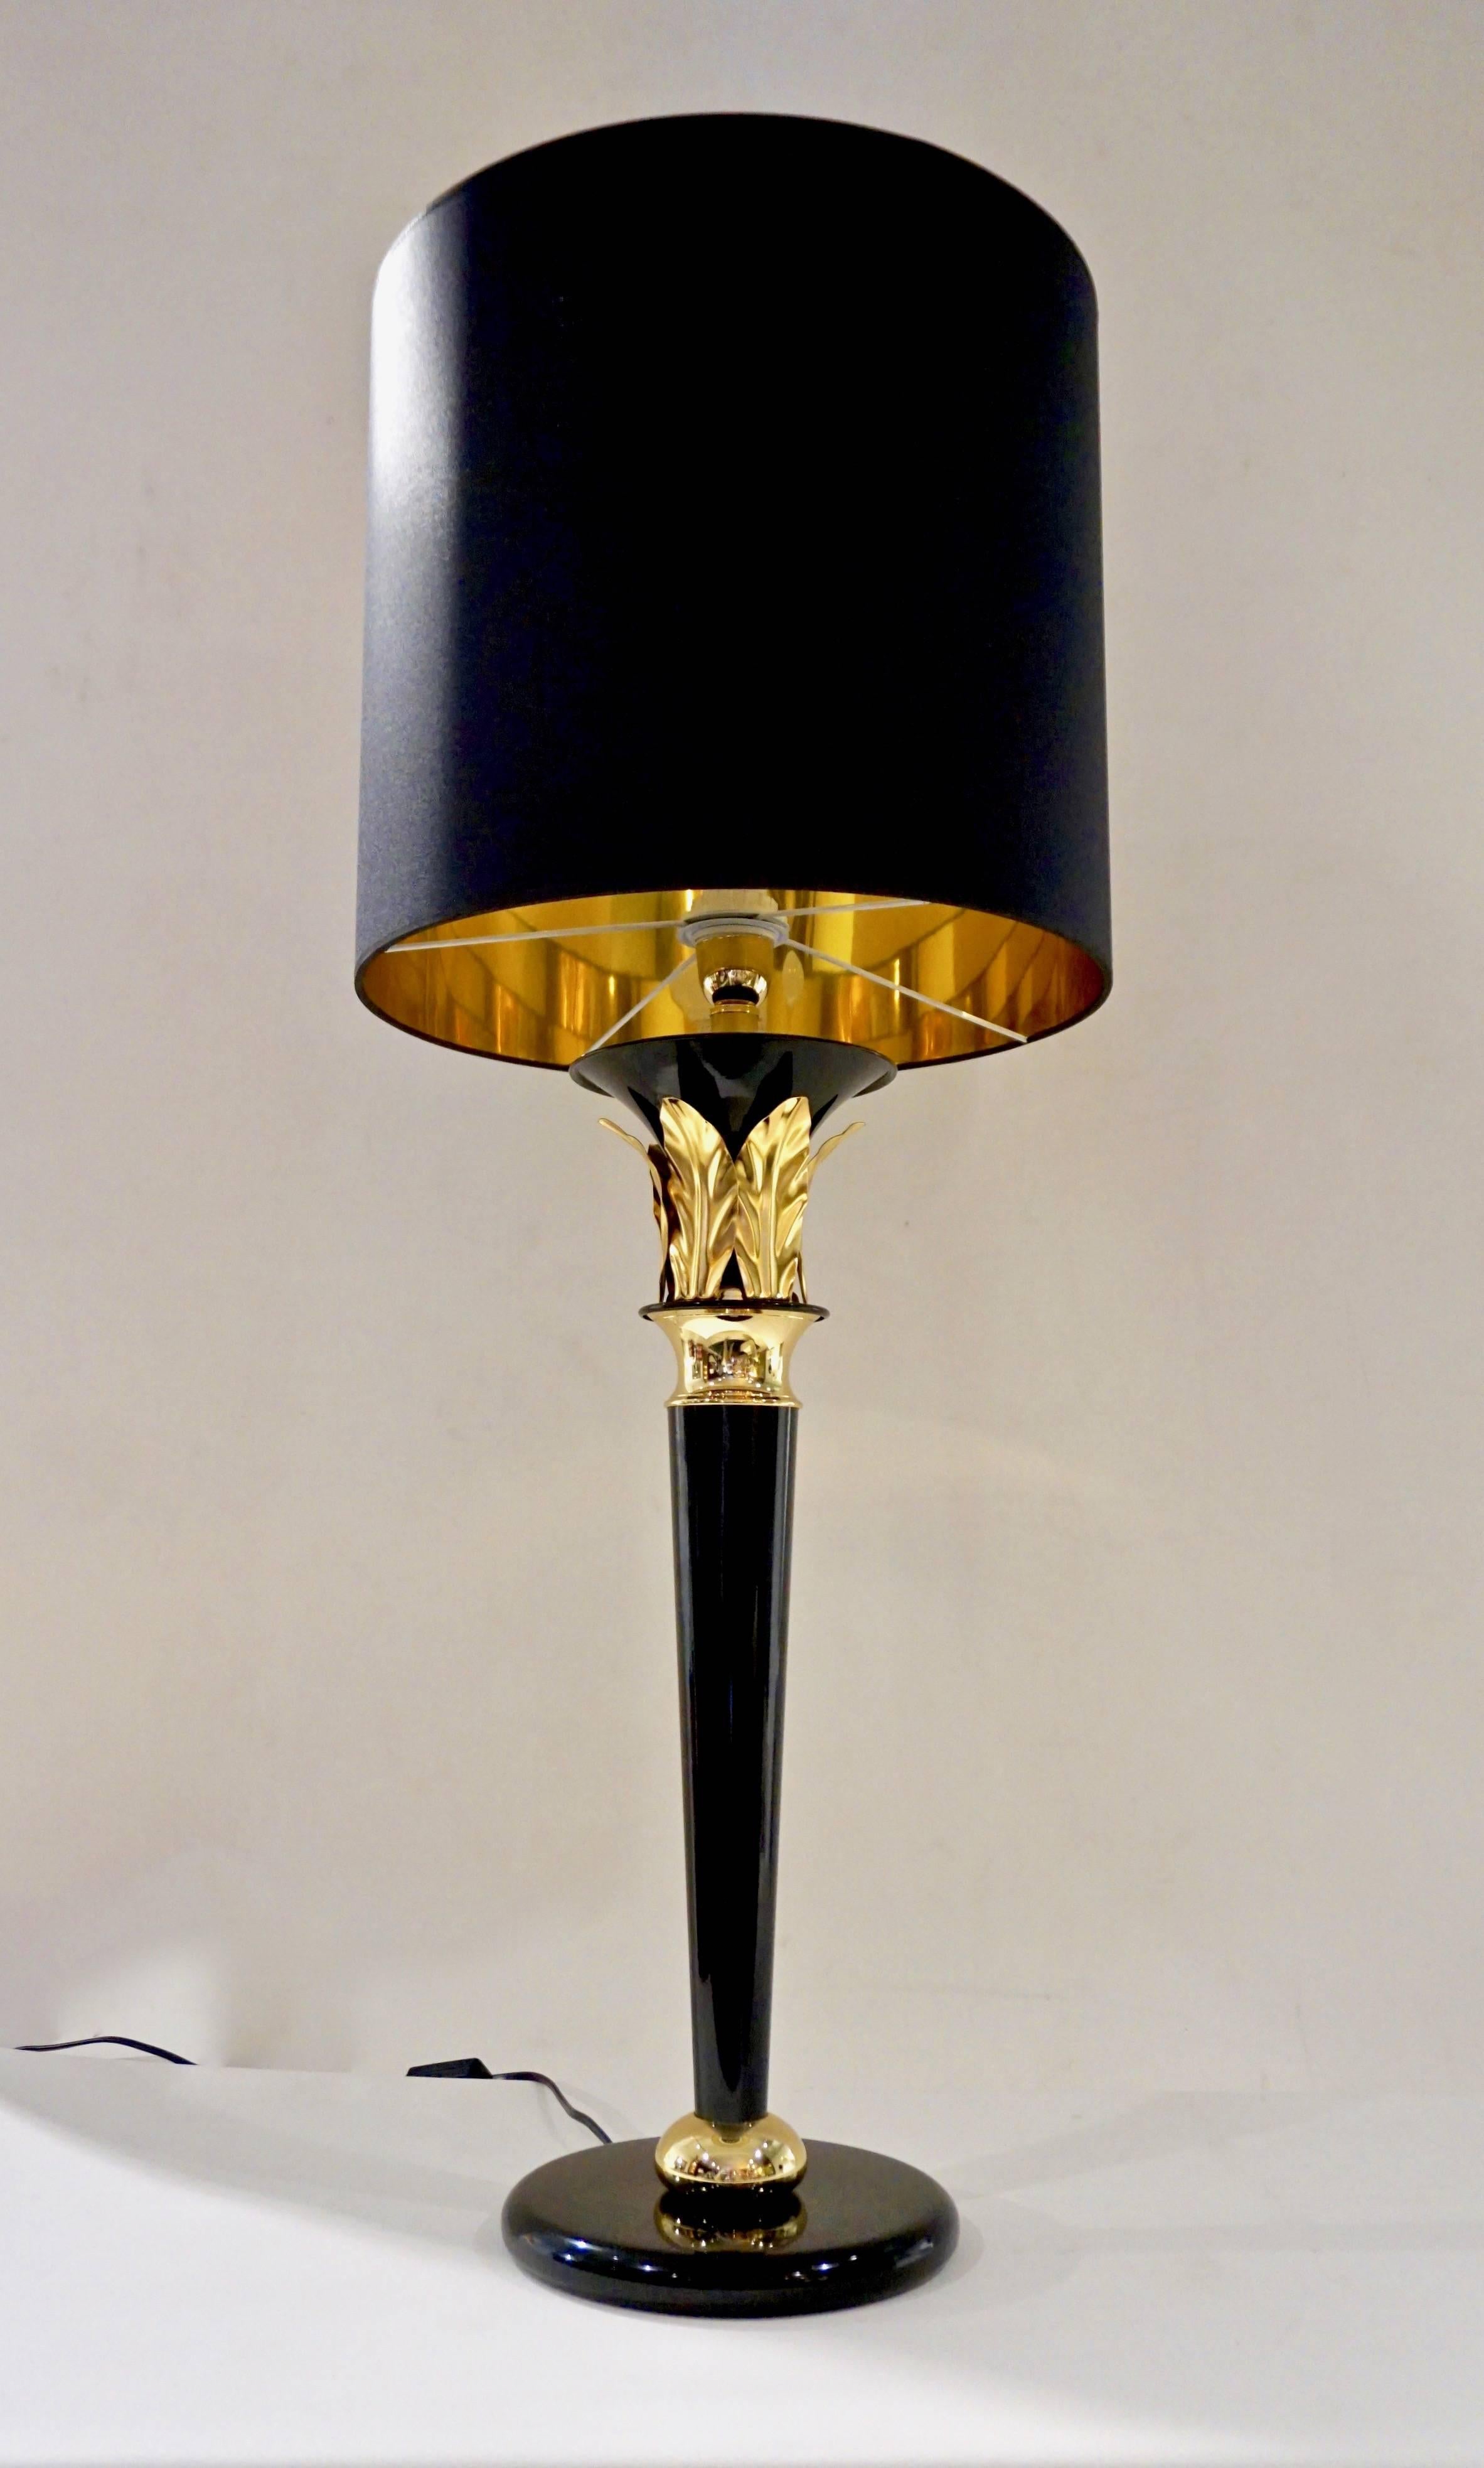 A vintage pair of tall glamorous Hollywood regency design lamps, handmade in Florence - Italy in black and gold lacquered metal, high quality of execution with a sleek and modern mirror like finish, the stem as an Art Deco column is highlighted with